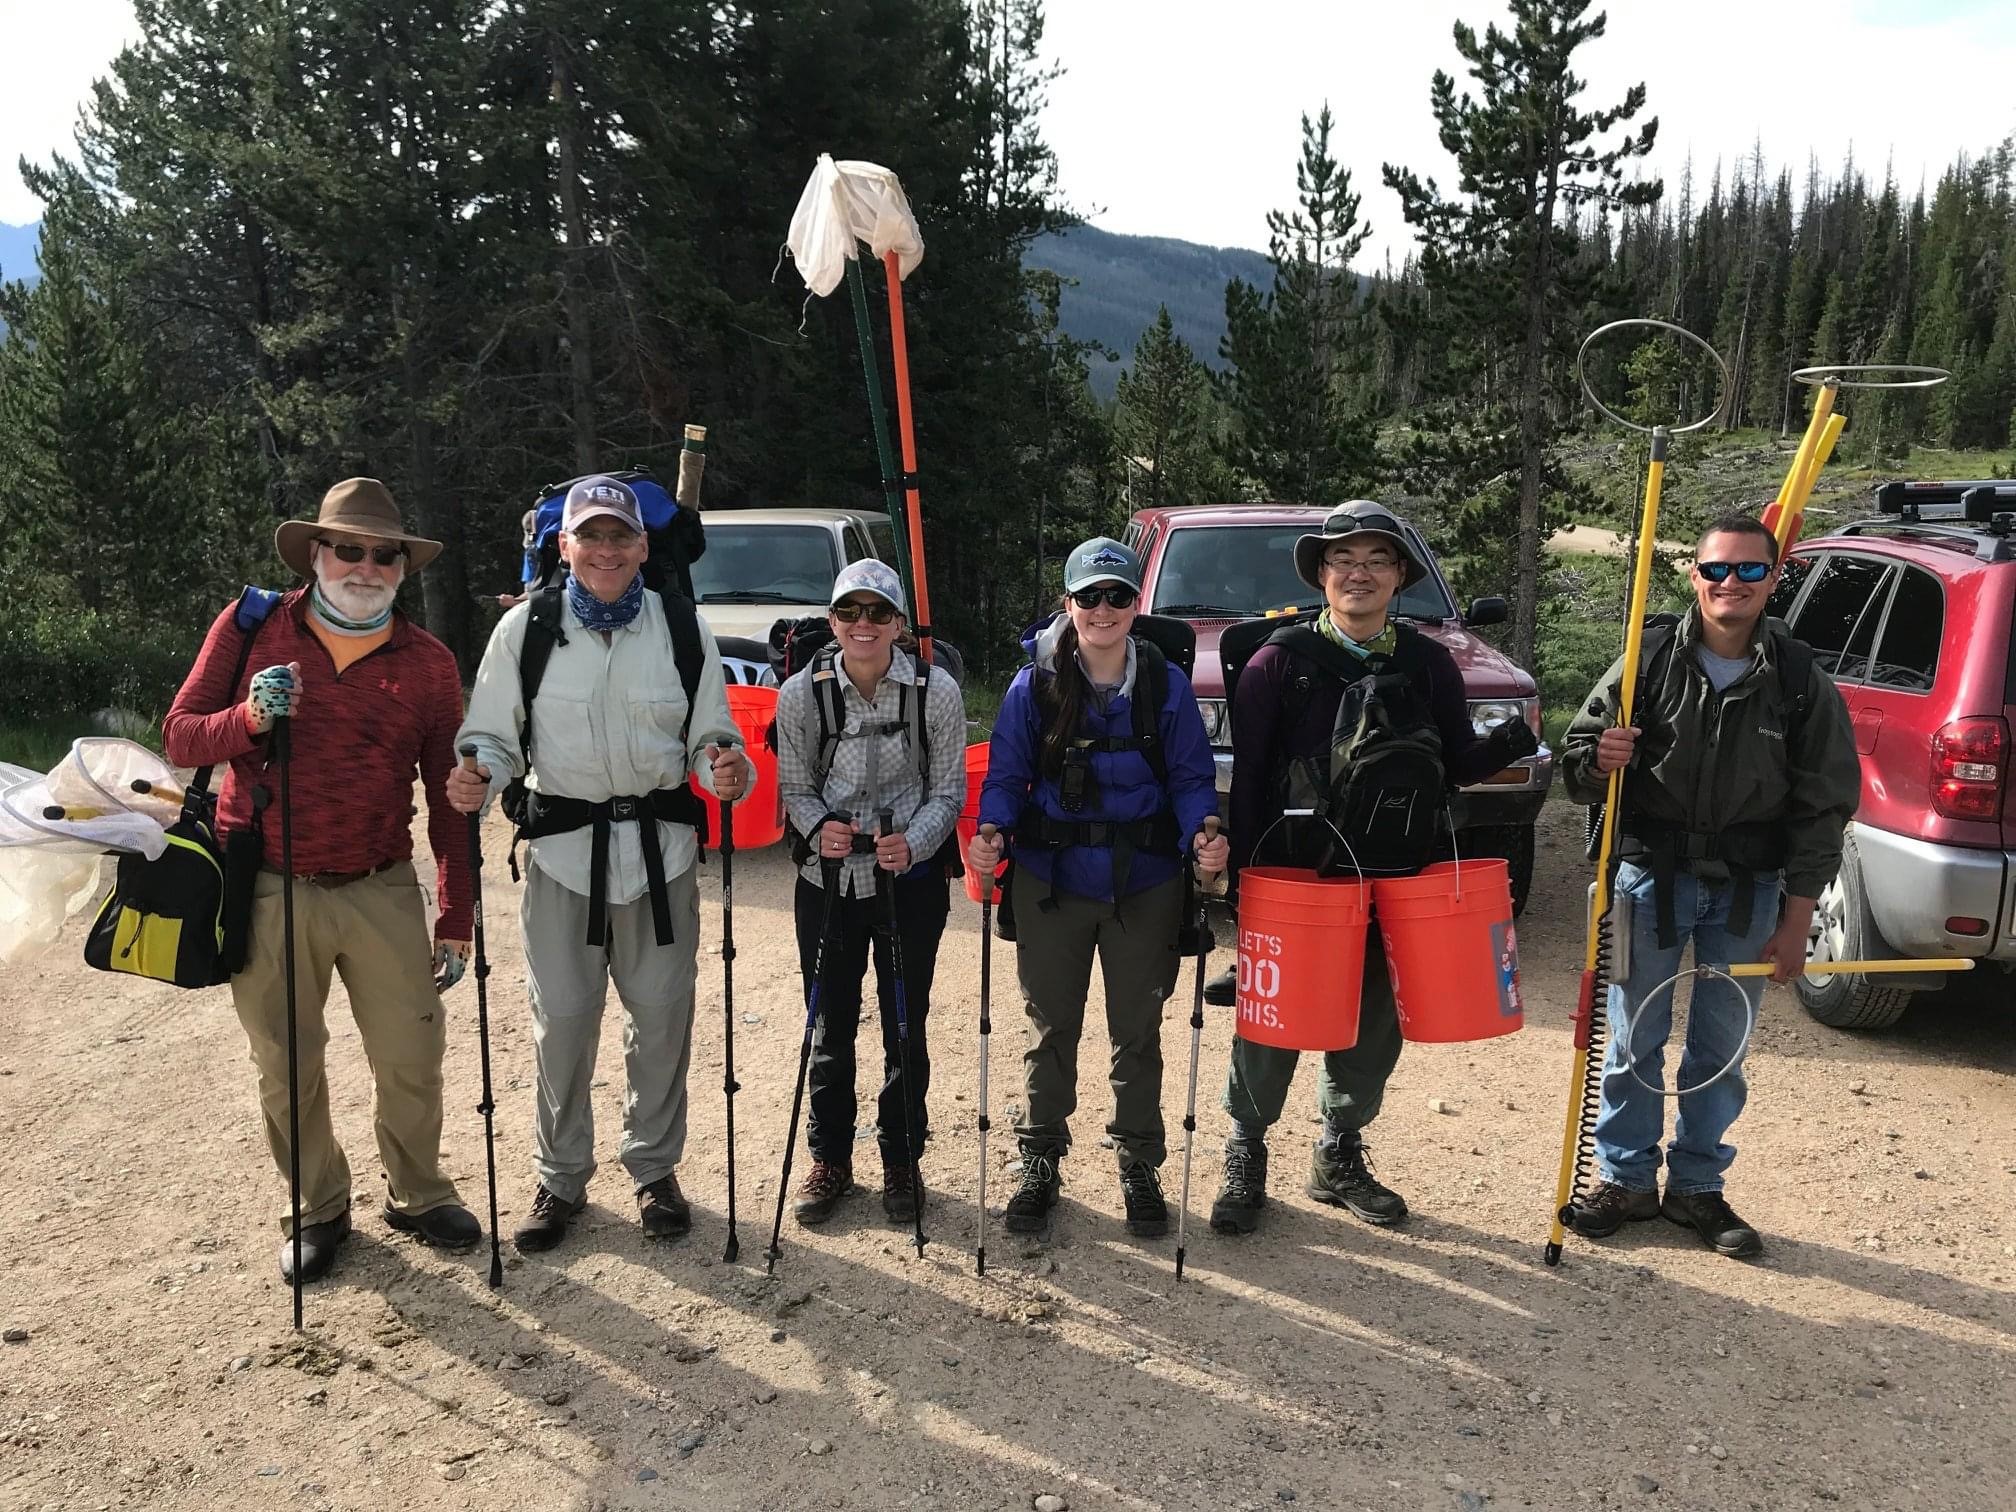 A group of people wearing backpacks and carrying nets and other tools pose for a photo.